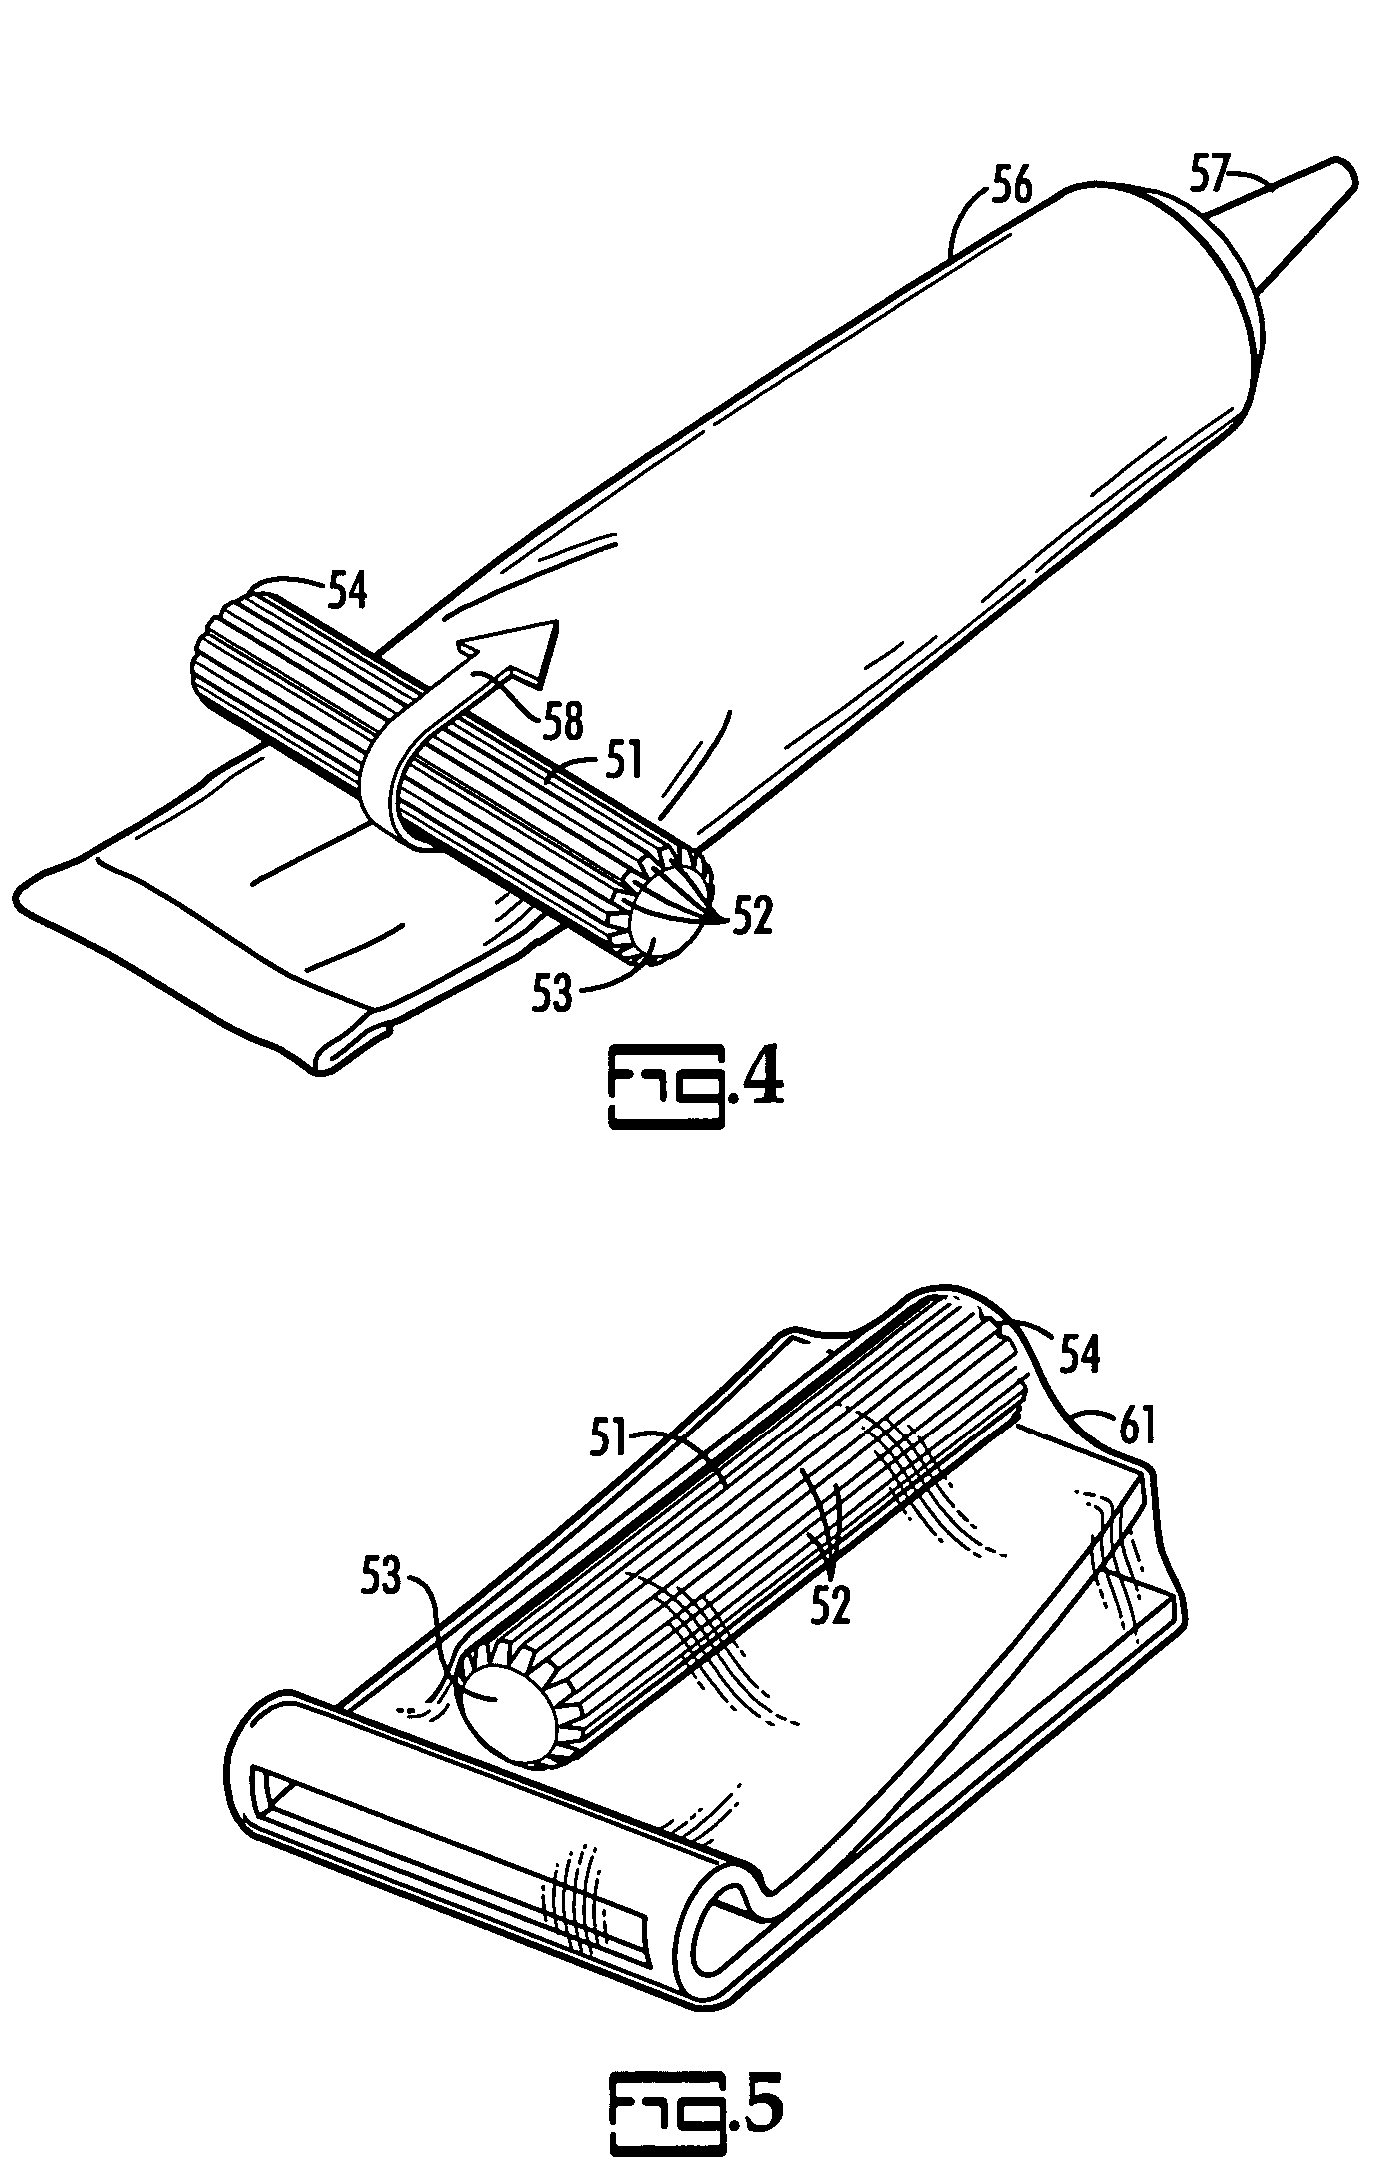 Apparatus for dispensing flowable contents of a collapsible tube